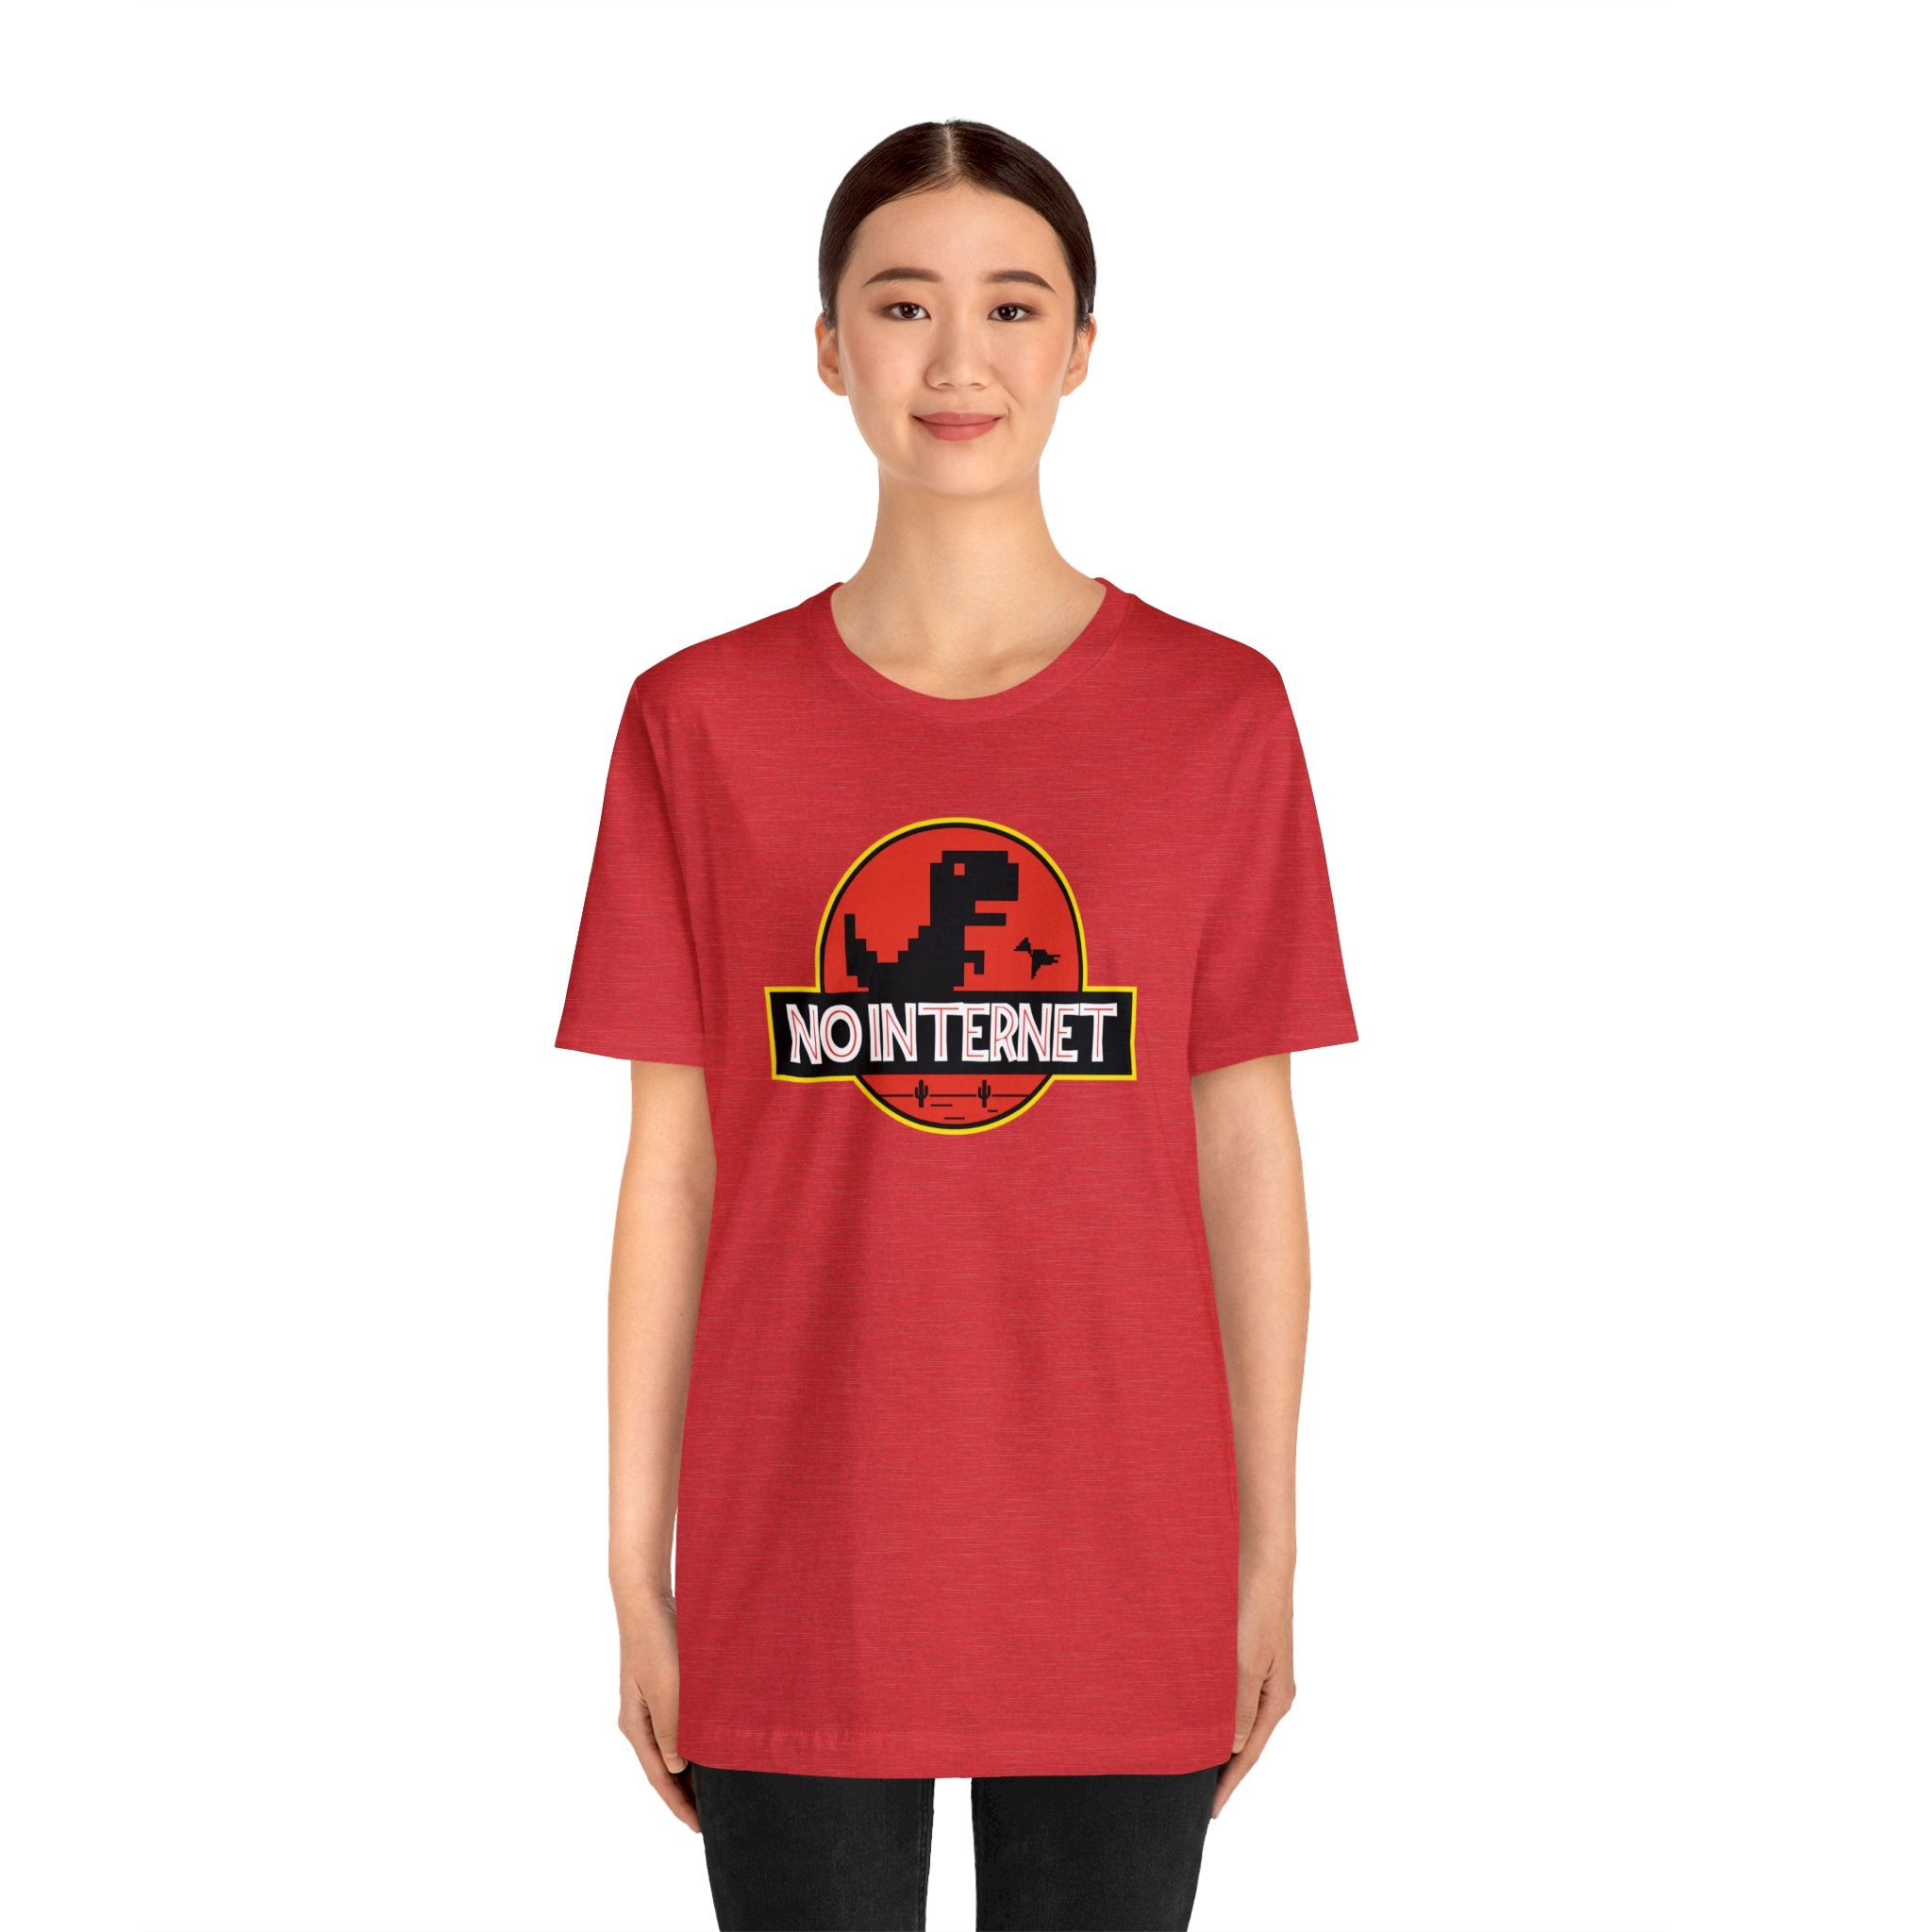 A geekpster woman wearing a red t-shirt that says No Internet.